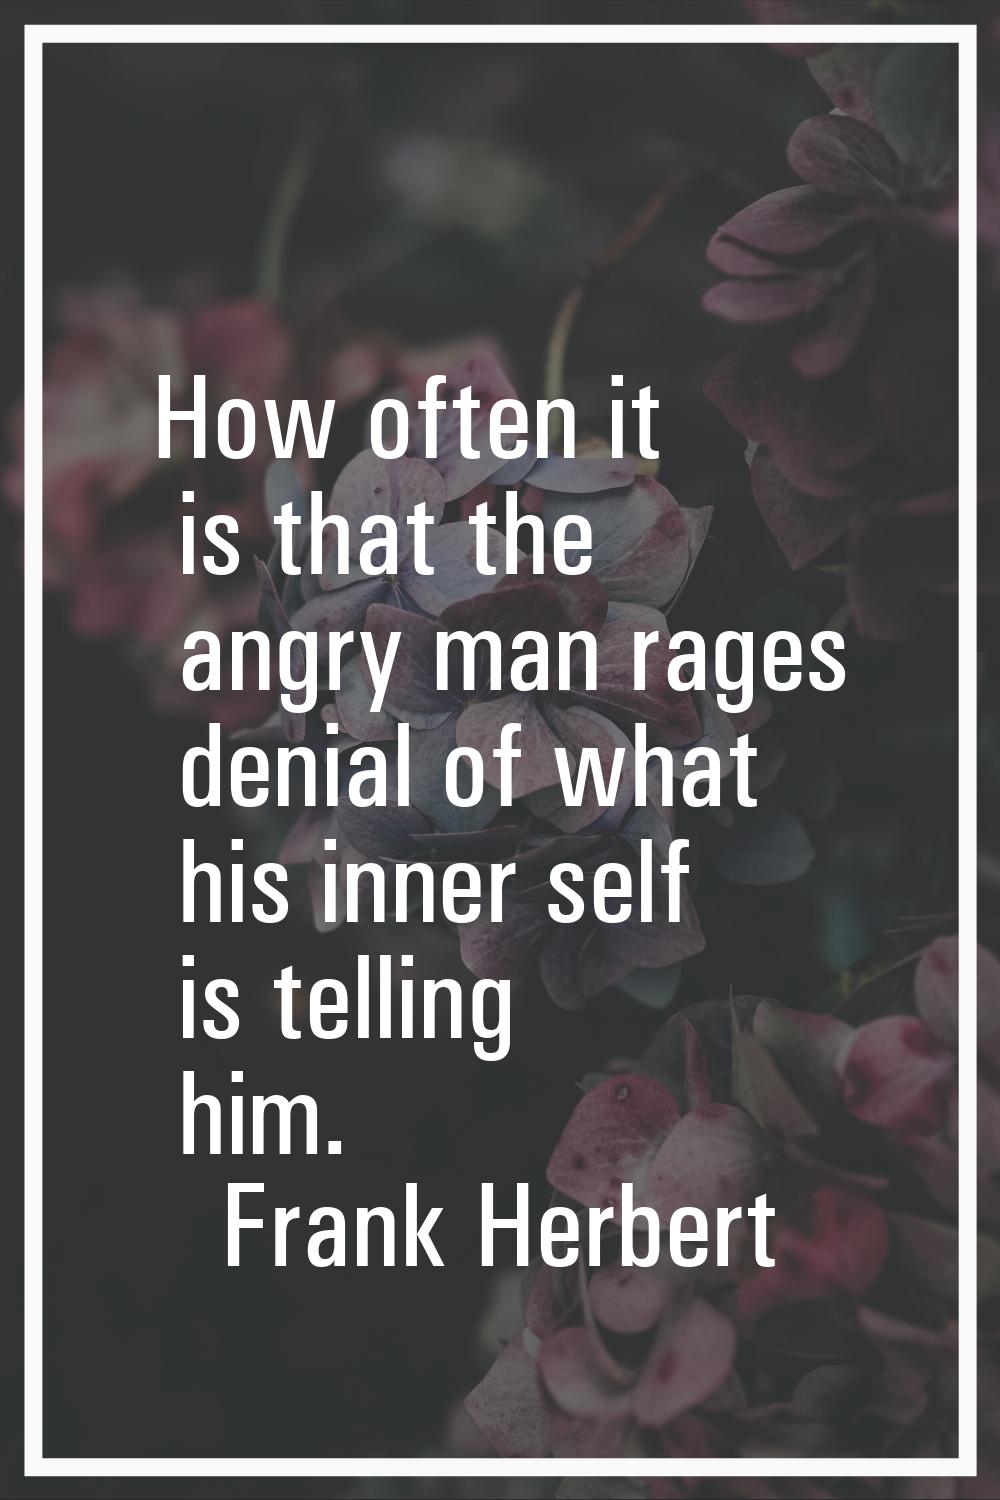 How often it is that the angry man rages denial of what his inner self is telling him.